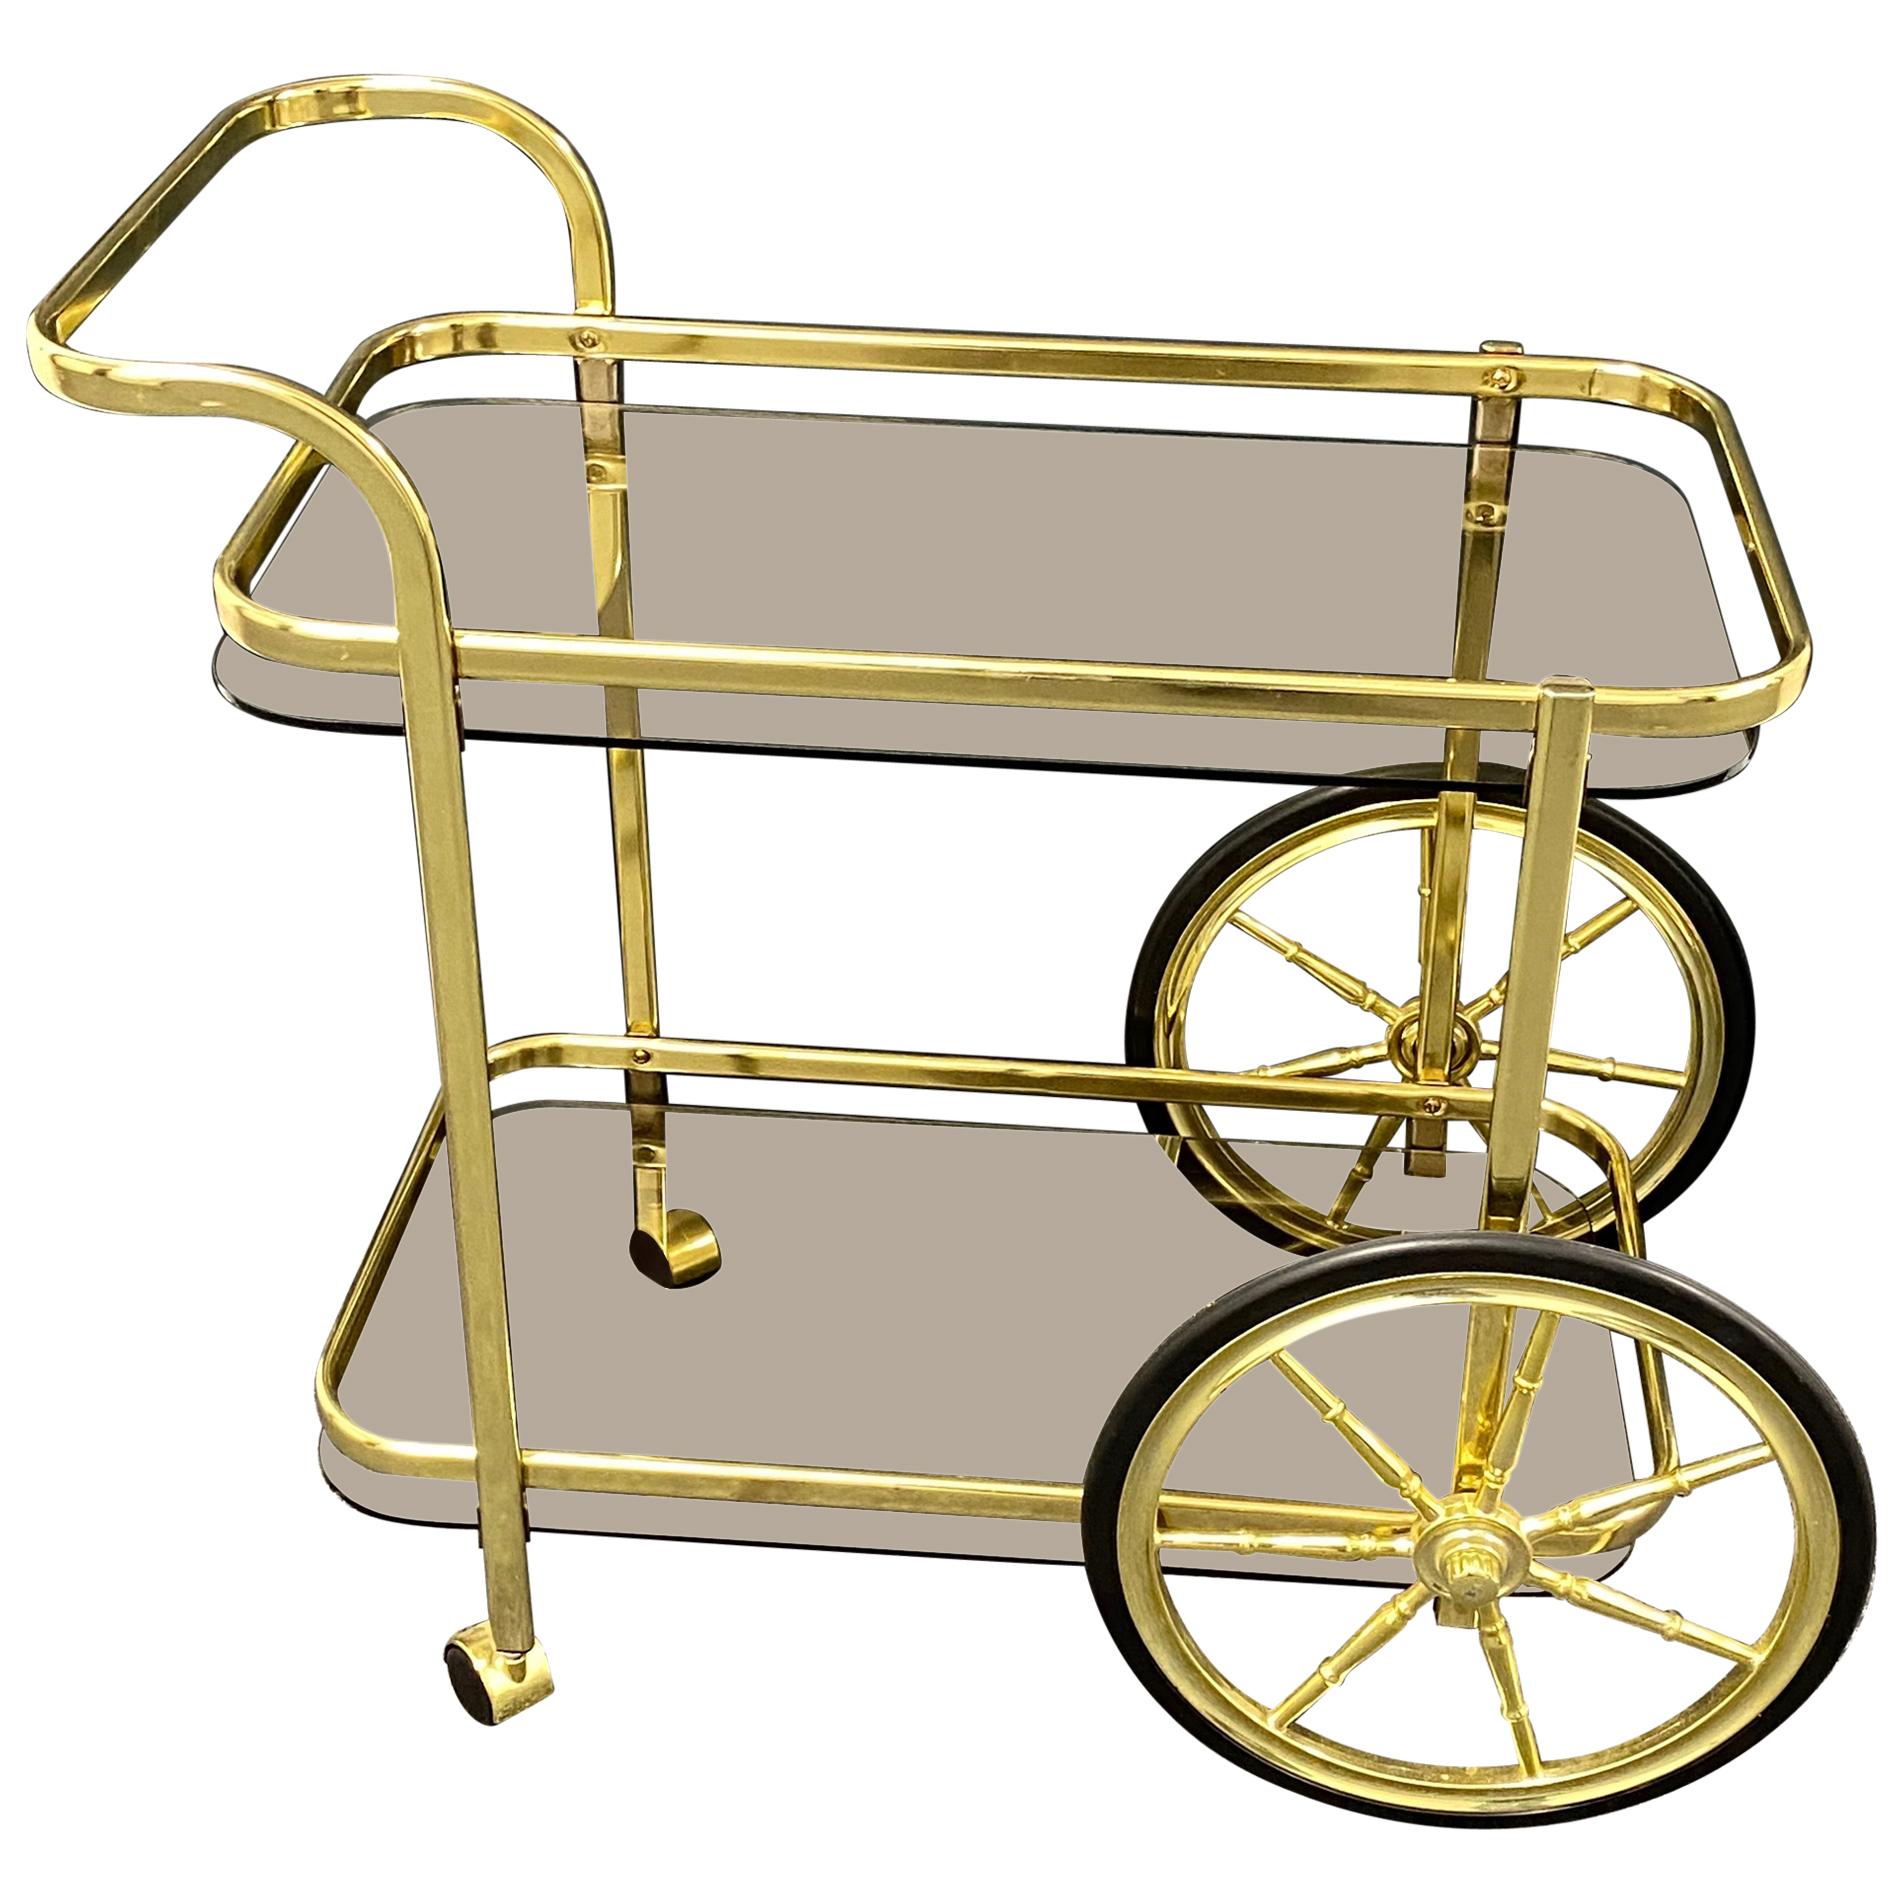 Hollywood Regency Style Bar Cart, Tea Trolley or Drinks Stand in Brass and Glass